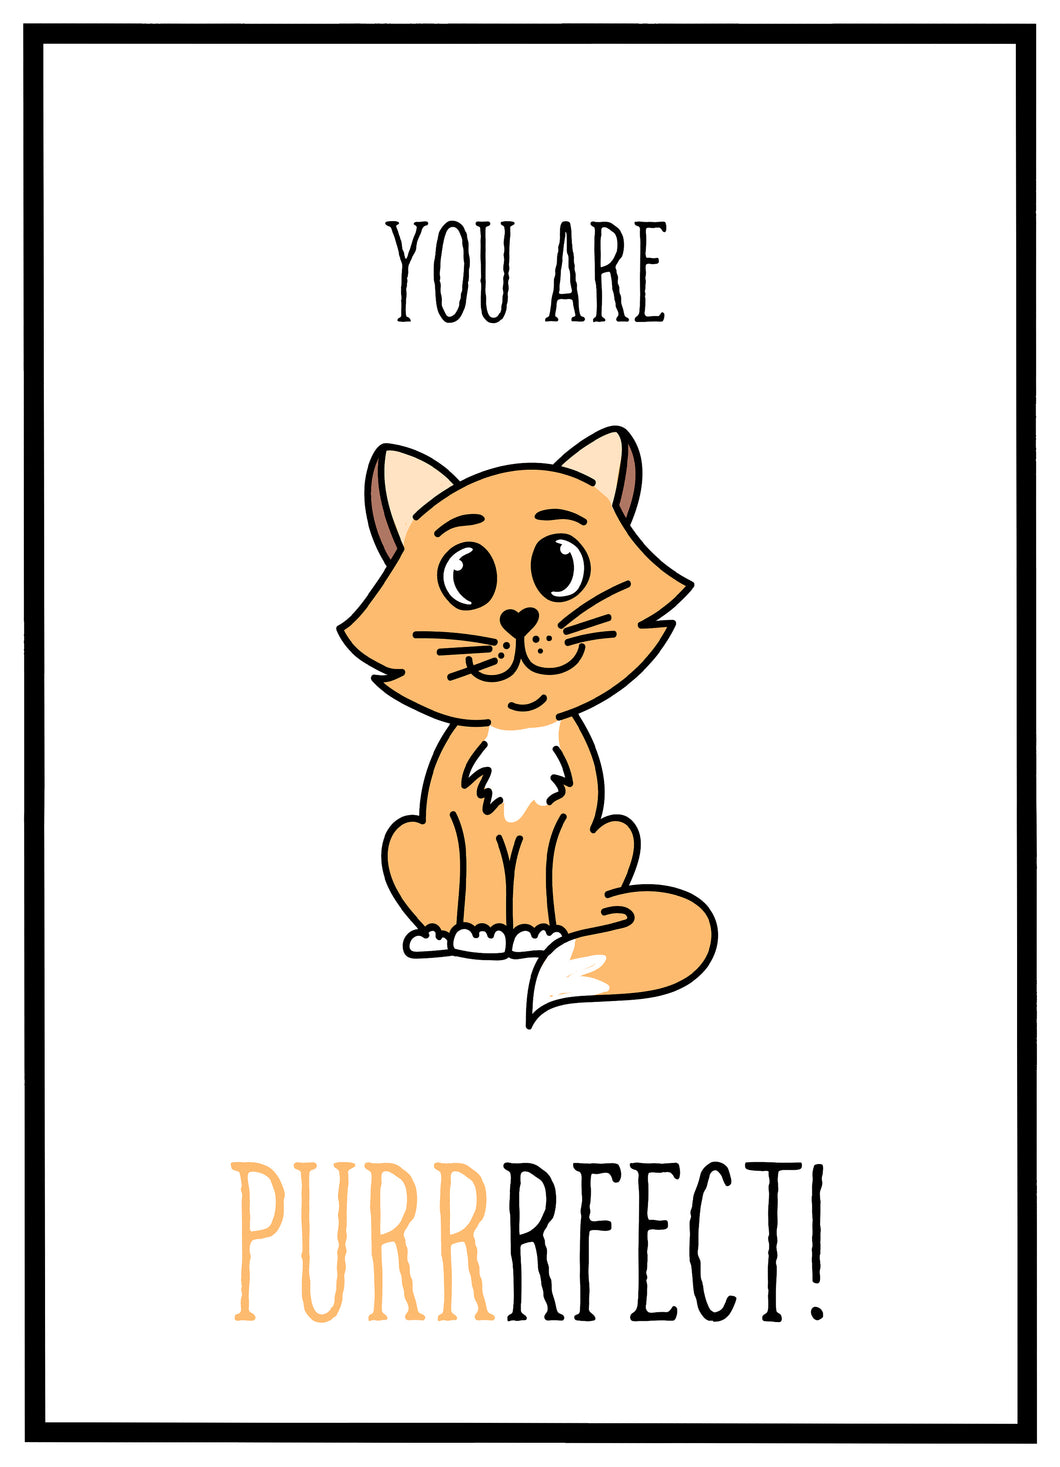 You Are Purrrfect - Plakat